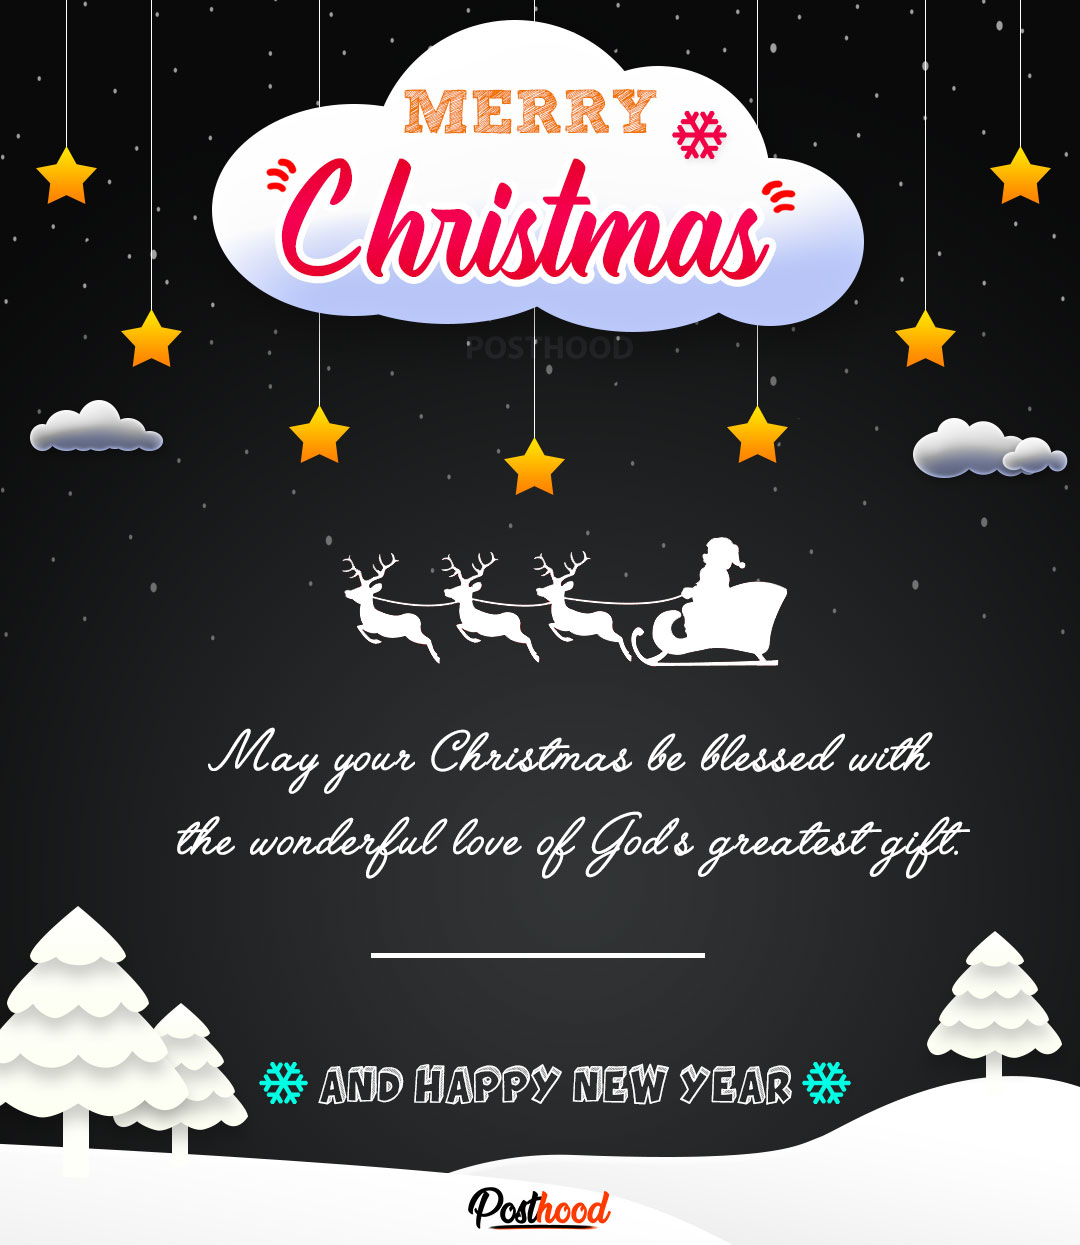 Here are 25 best Christmas quotes to wish them a very happy Christmas and New Year. Send your blessings with these cute Christmas messages. 